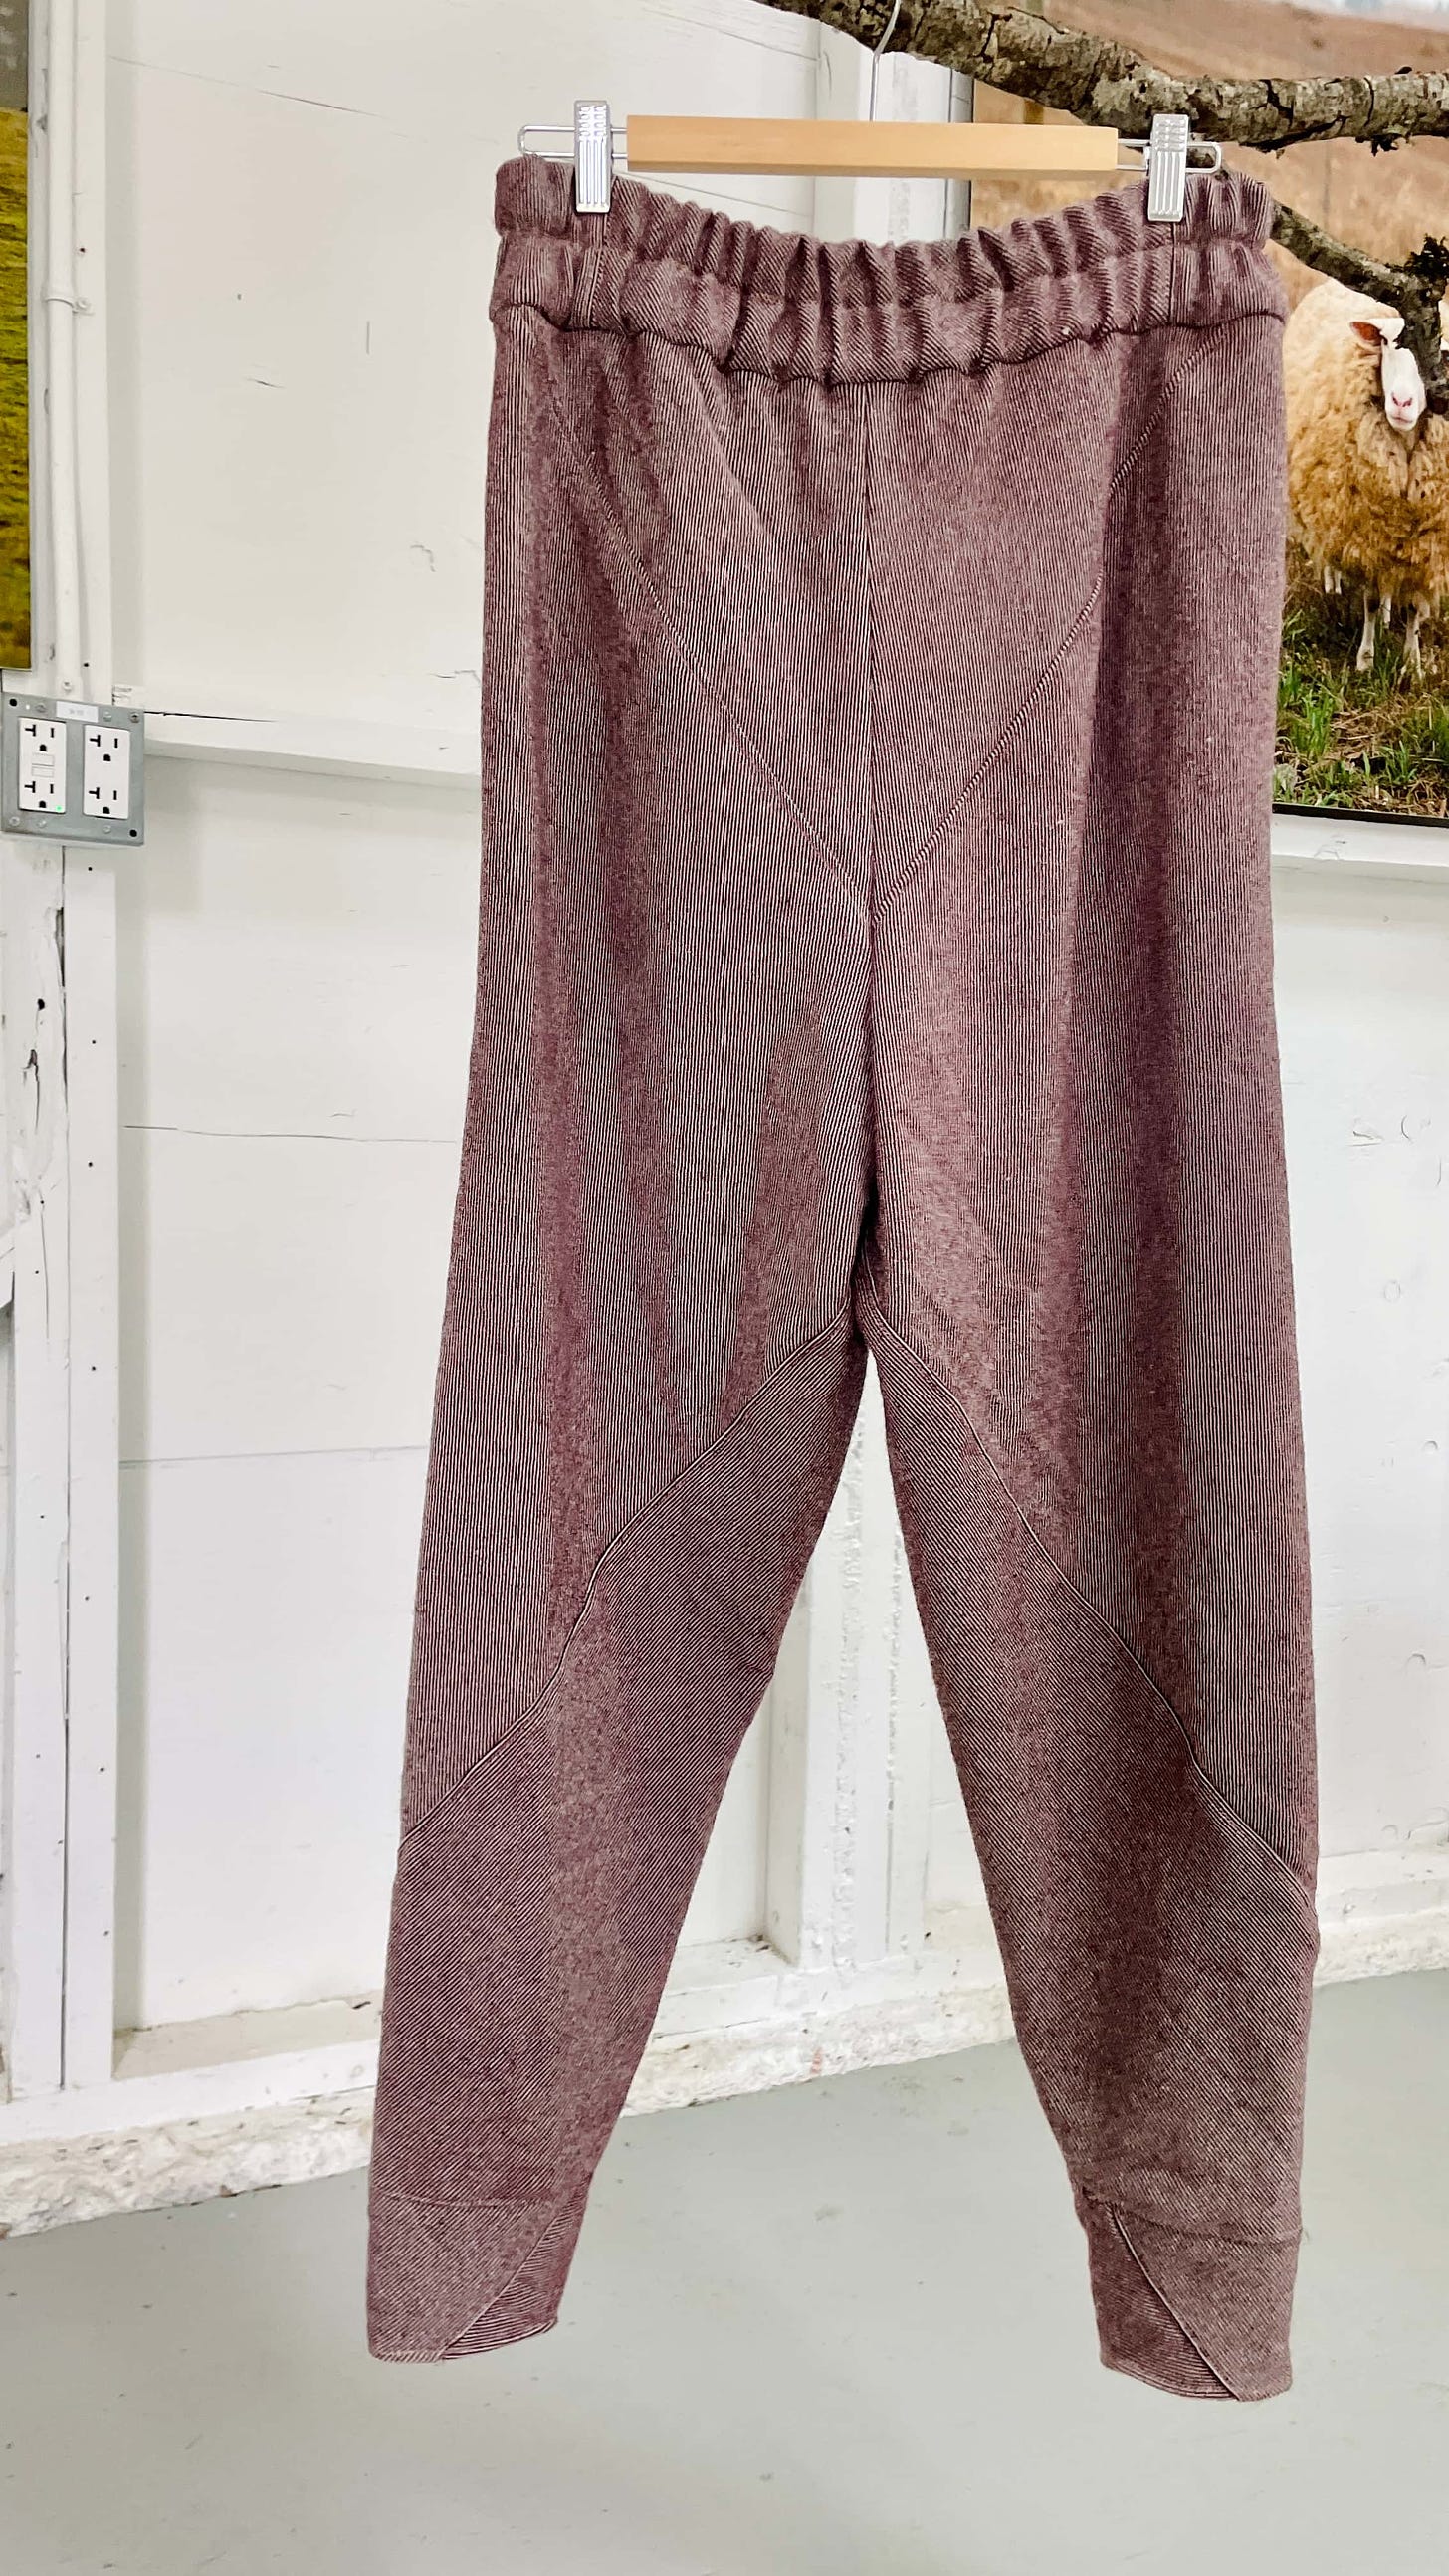 Back view of the 10-Square Pants in Lani’s Lana wool twill